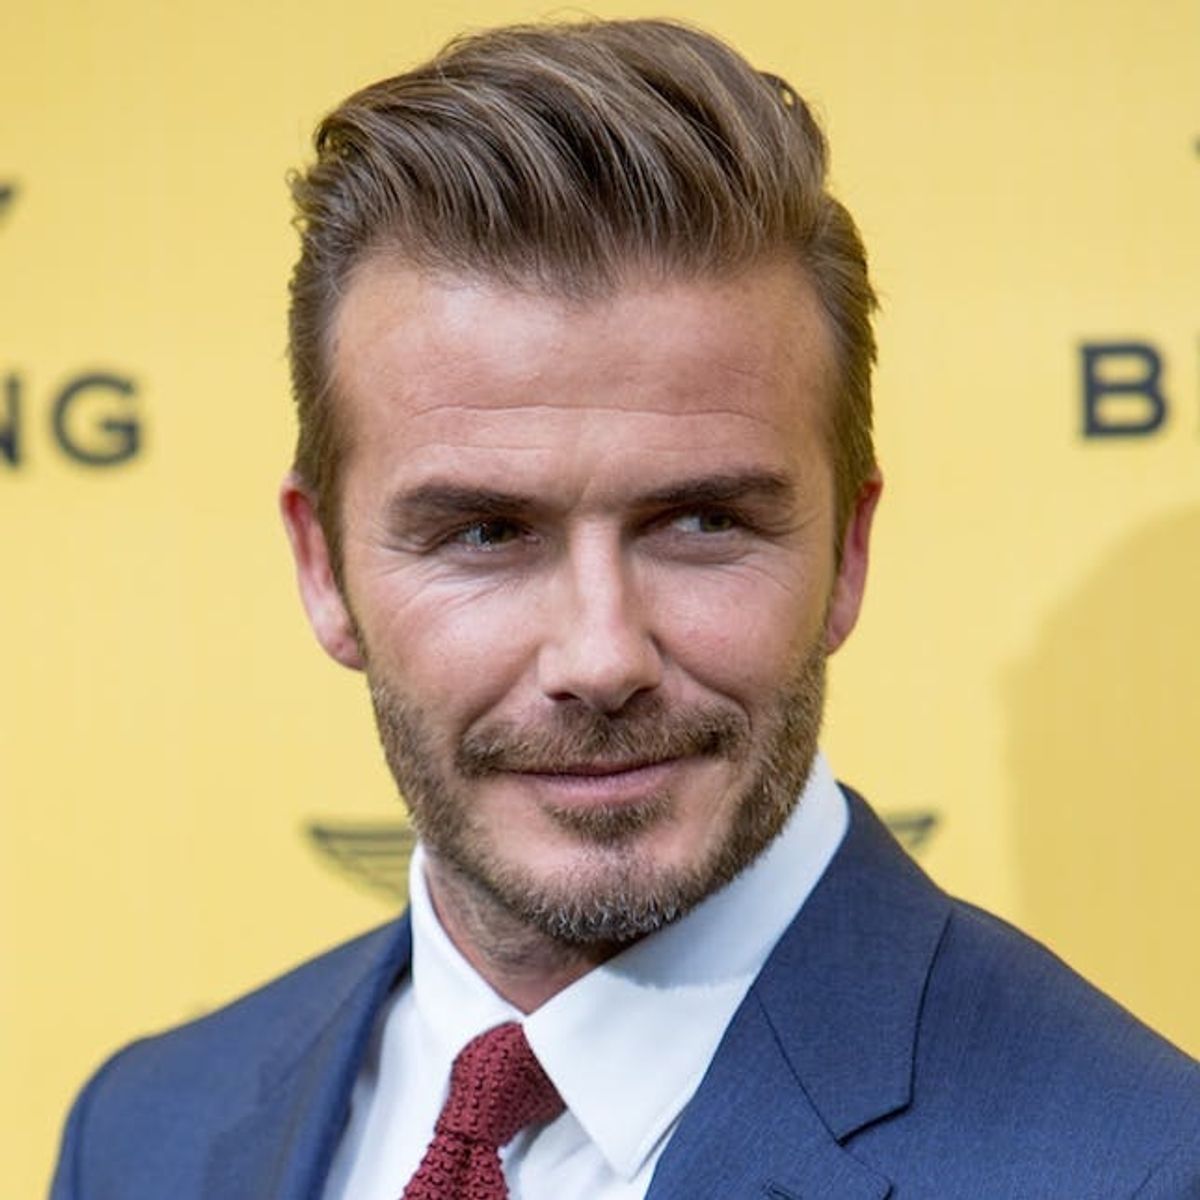 David Beckham’s Latest Tattoo Was Inspired by His Daughter